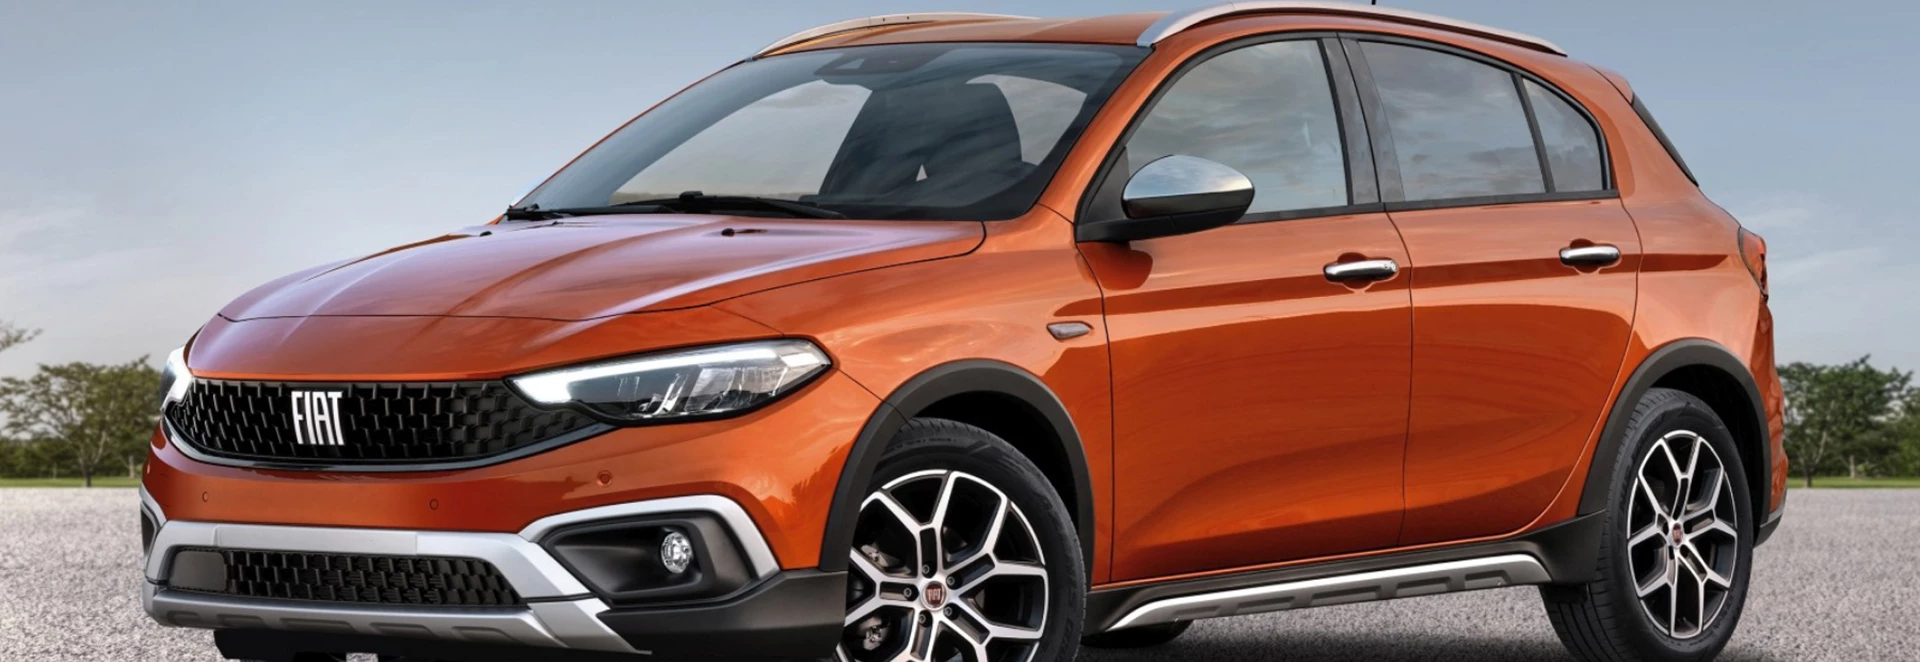 Fiat Tipo Cross Prices